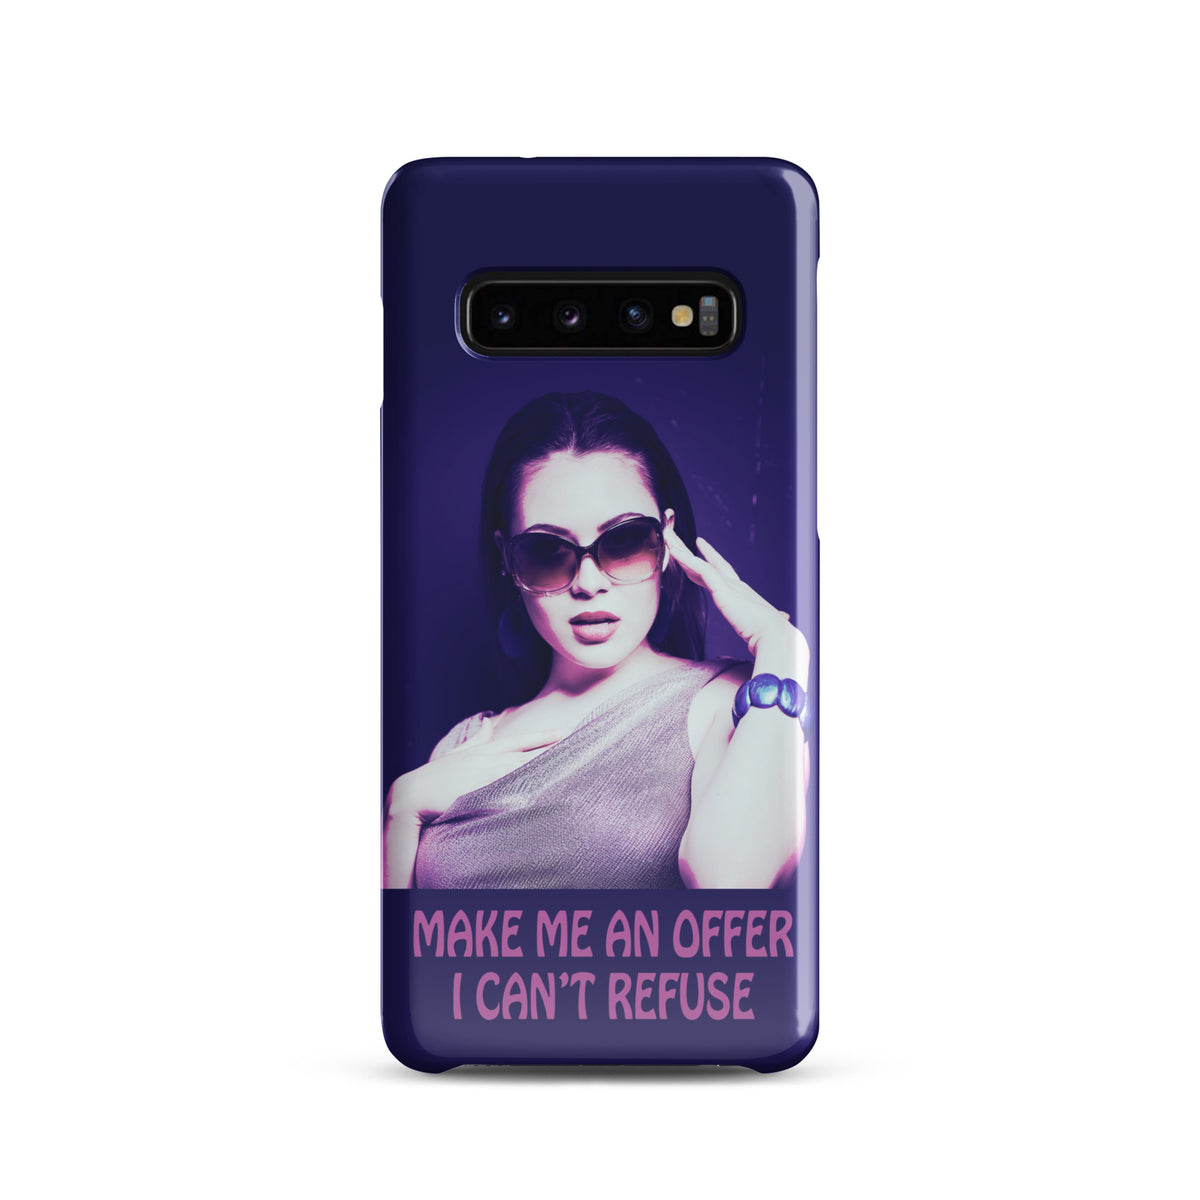  Samsung Phone case with a purple wrap and an image of a young woman in sunglasses. There is pink text that reads Make Me An Offer I Can't Refuse